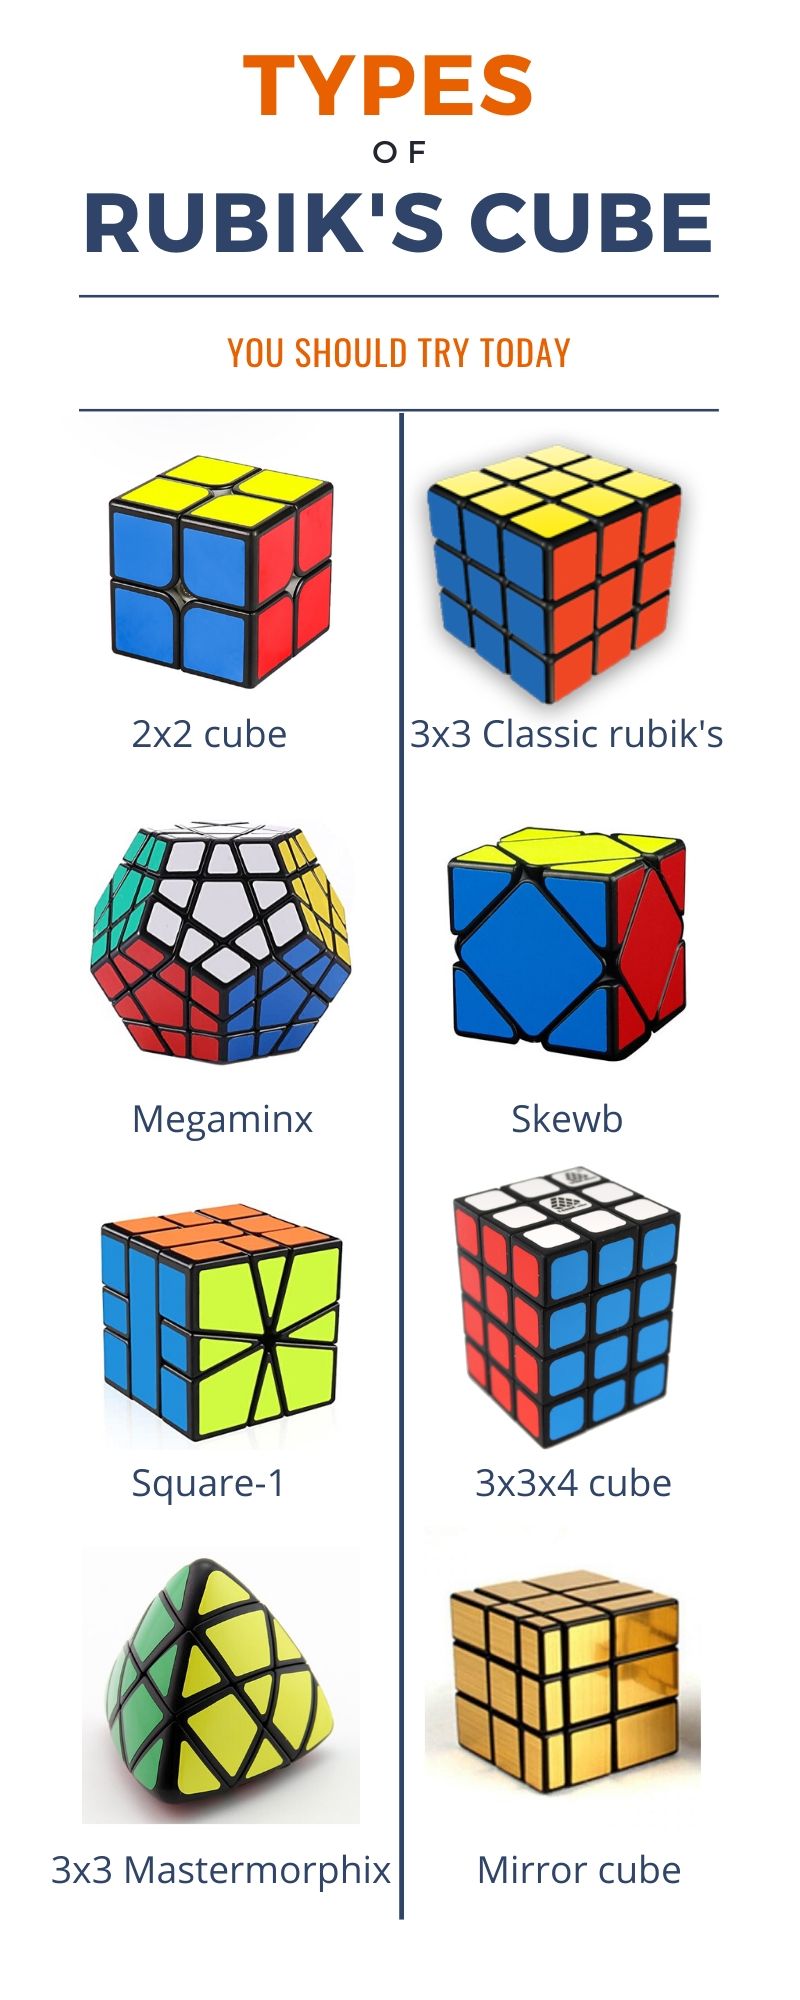 8 Types of Rubiks Cube You should try Today